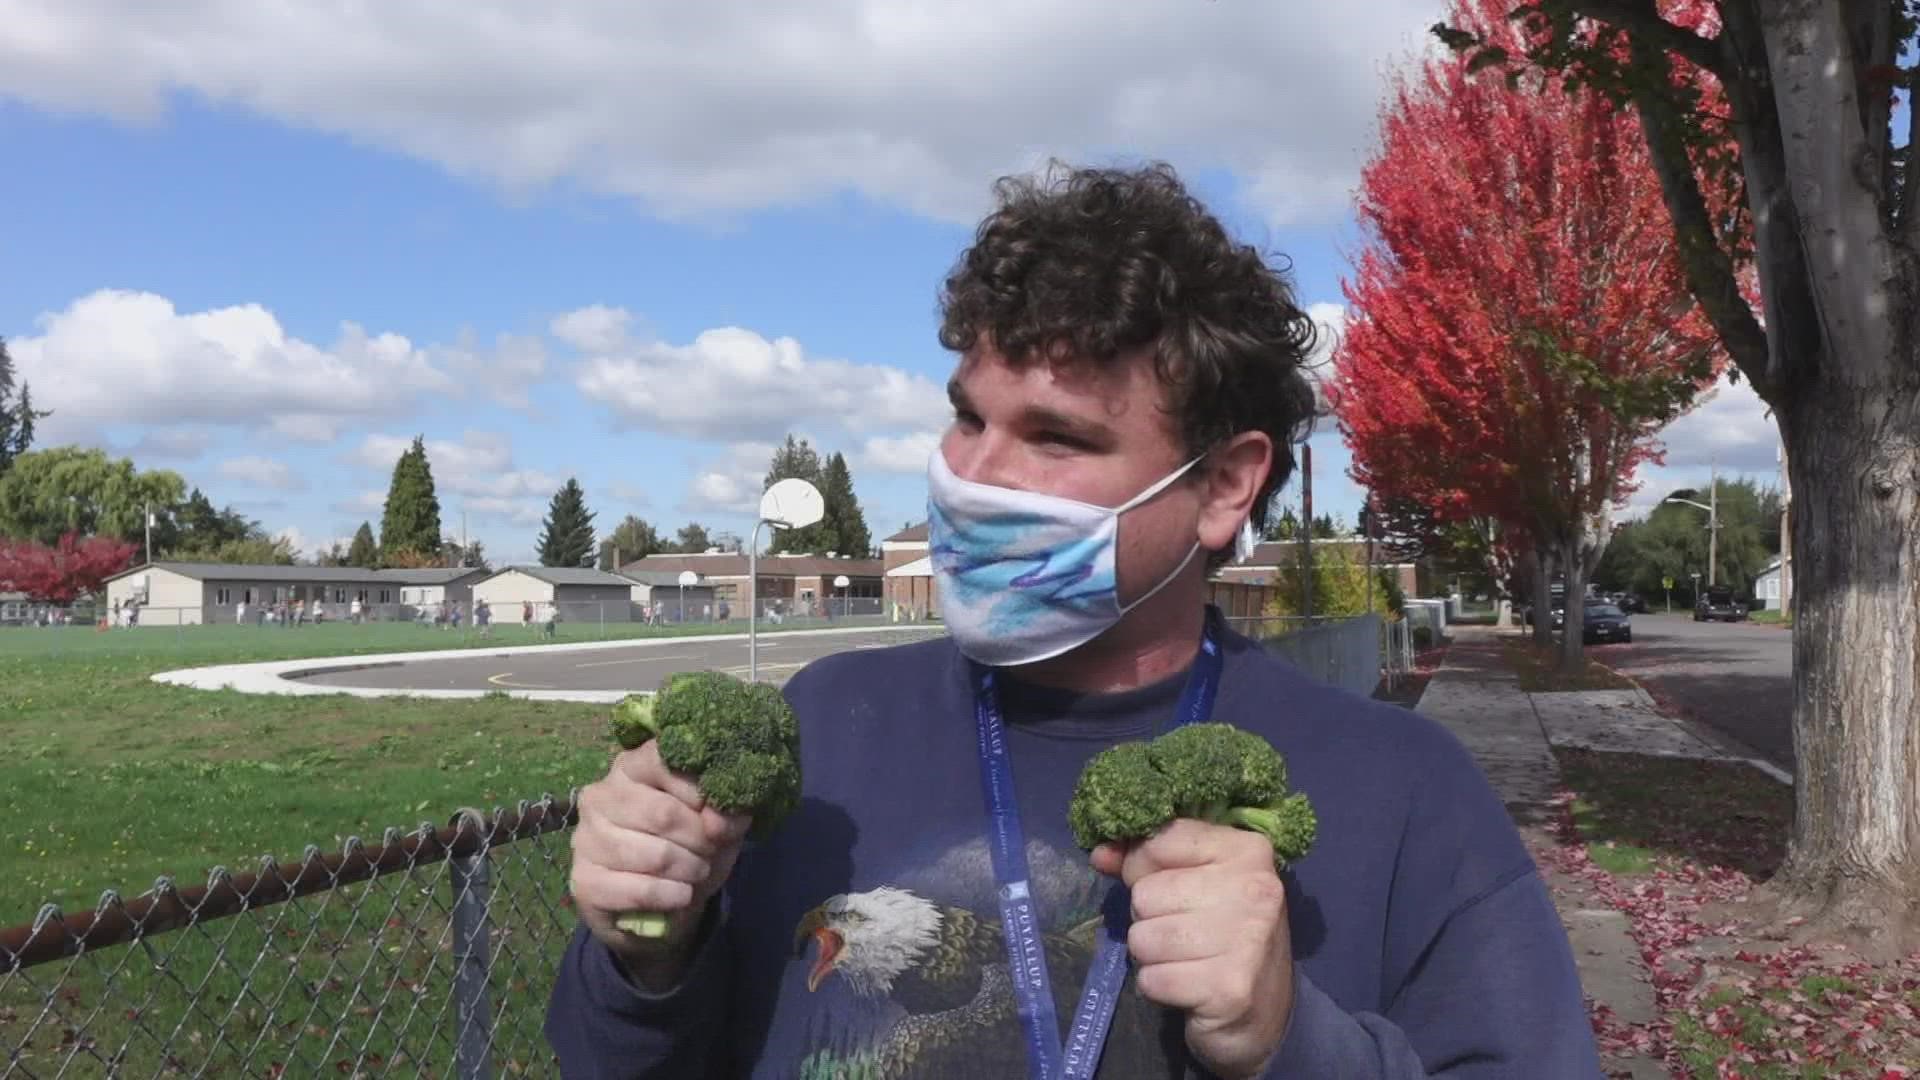 He's known as the "Broccoli guy" for dancing at Seattle sporting events with the vegetable in-hand. But he's a substitute teacher by day and has a message to share.